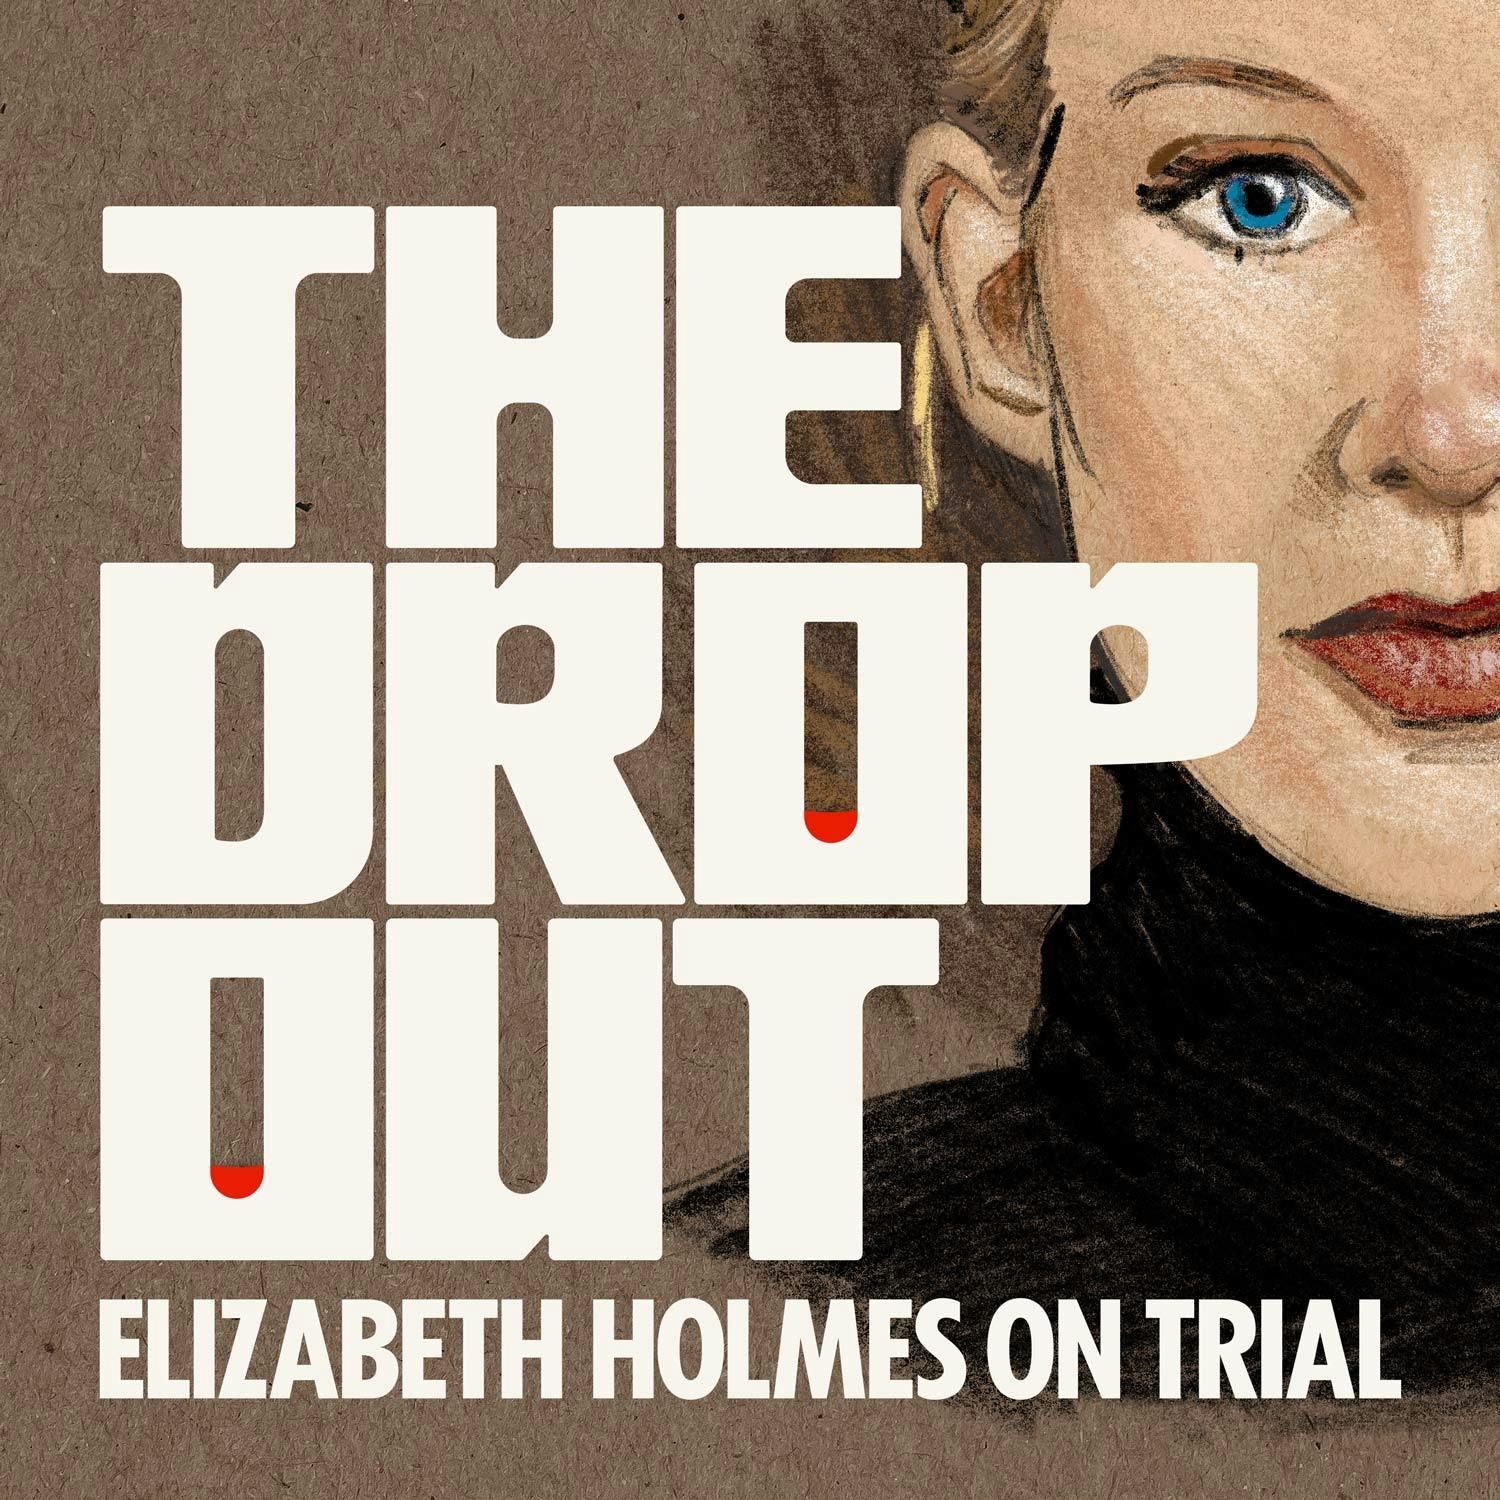 Jurors Want Out of Elizabeth Holmes Trial